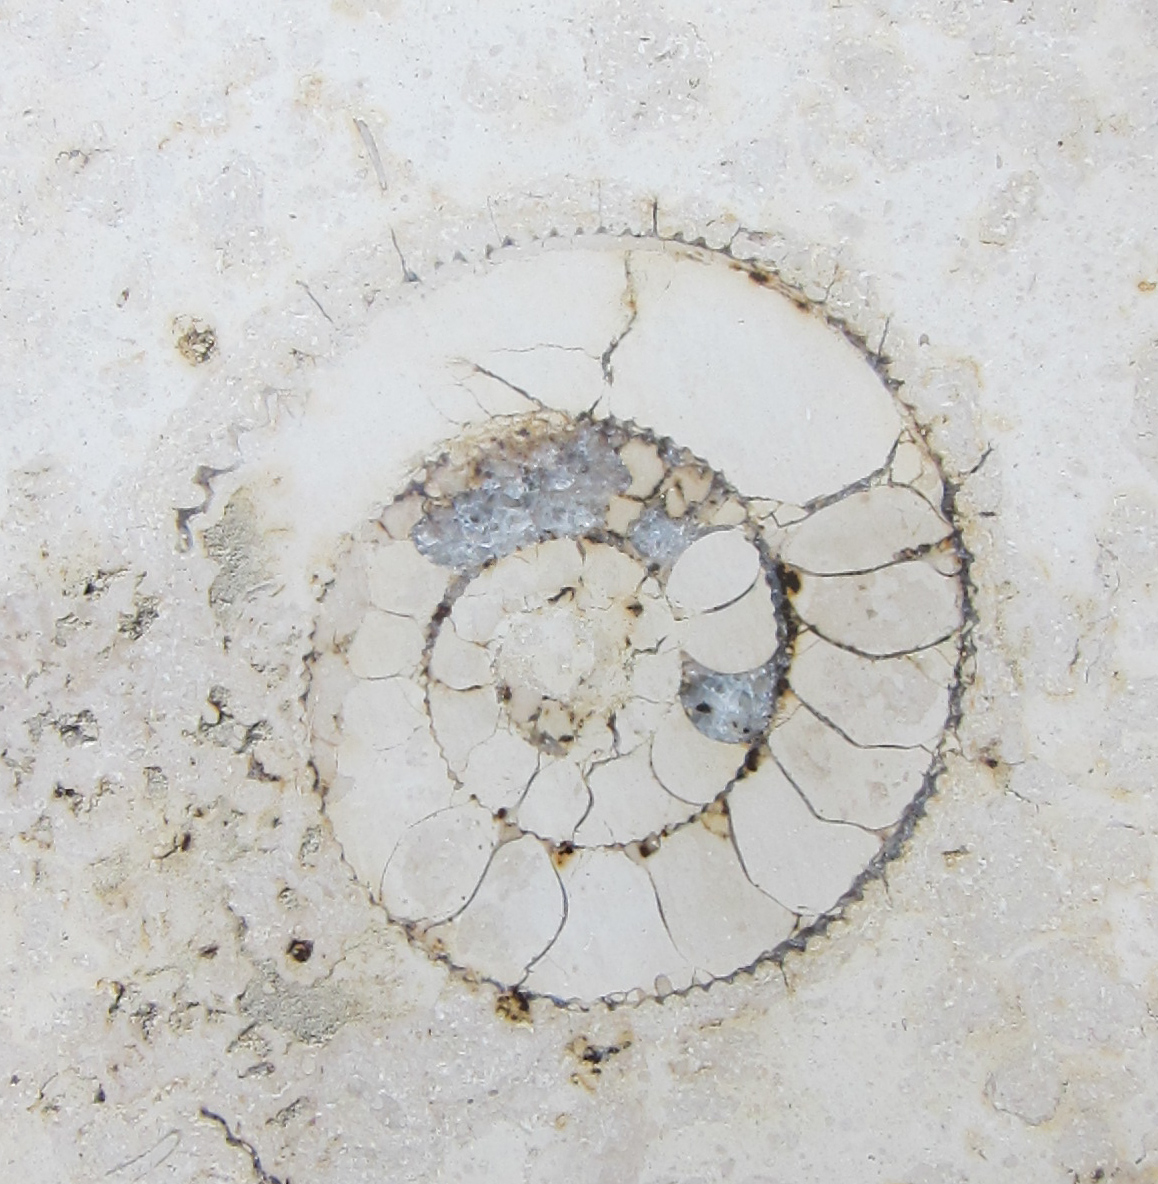 Finding Fossils in the City